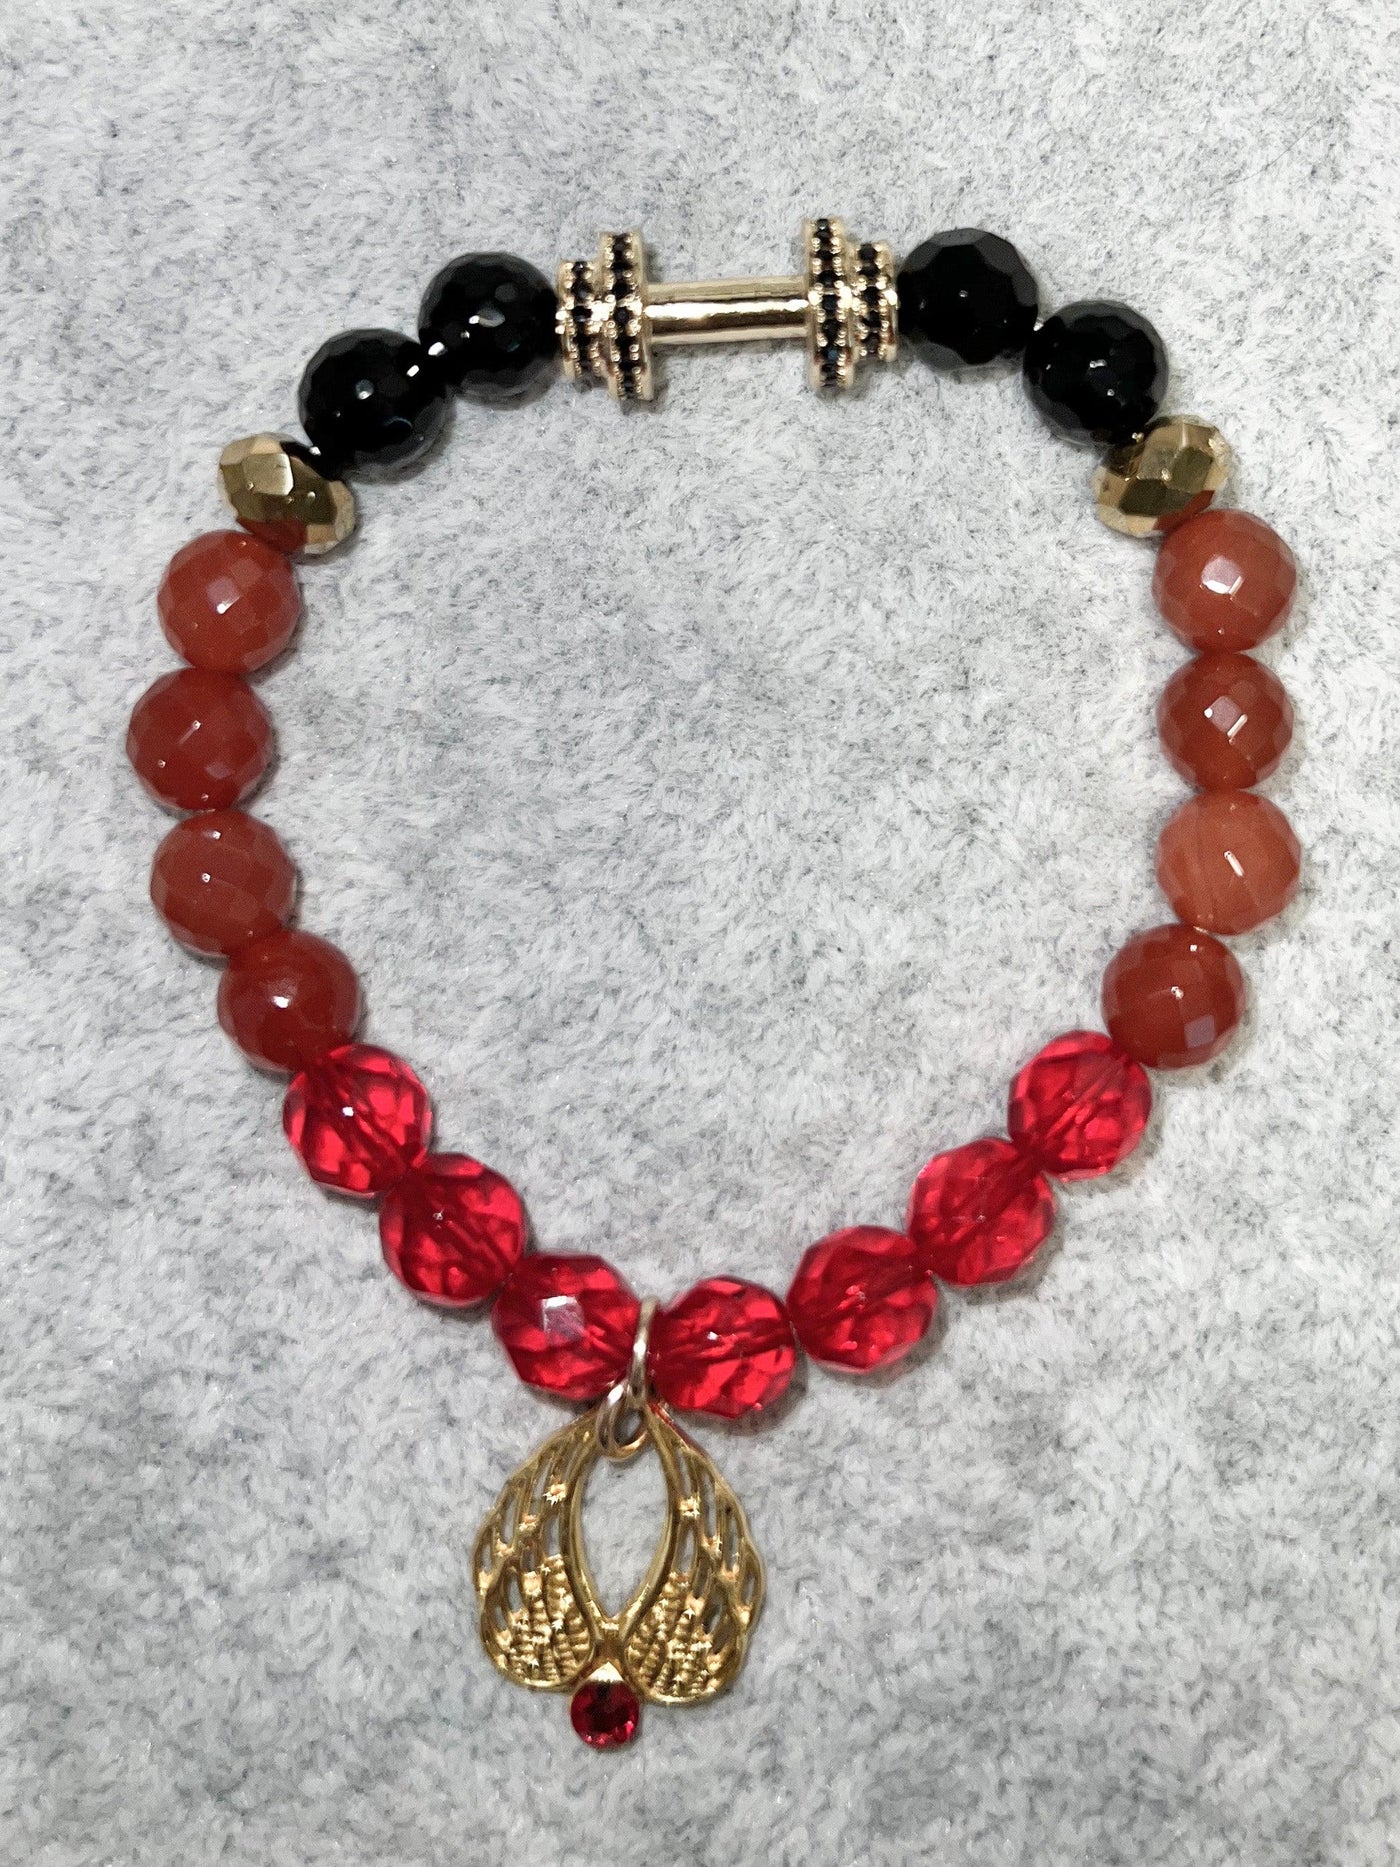 Gold and Black Dumbbell Bead Bracelet with Black and Red beads - Brent's Bling